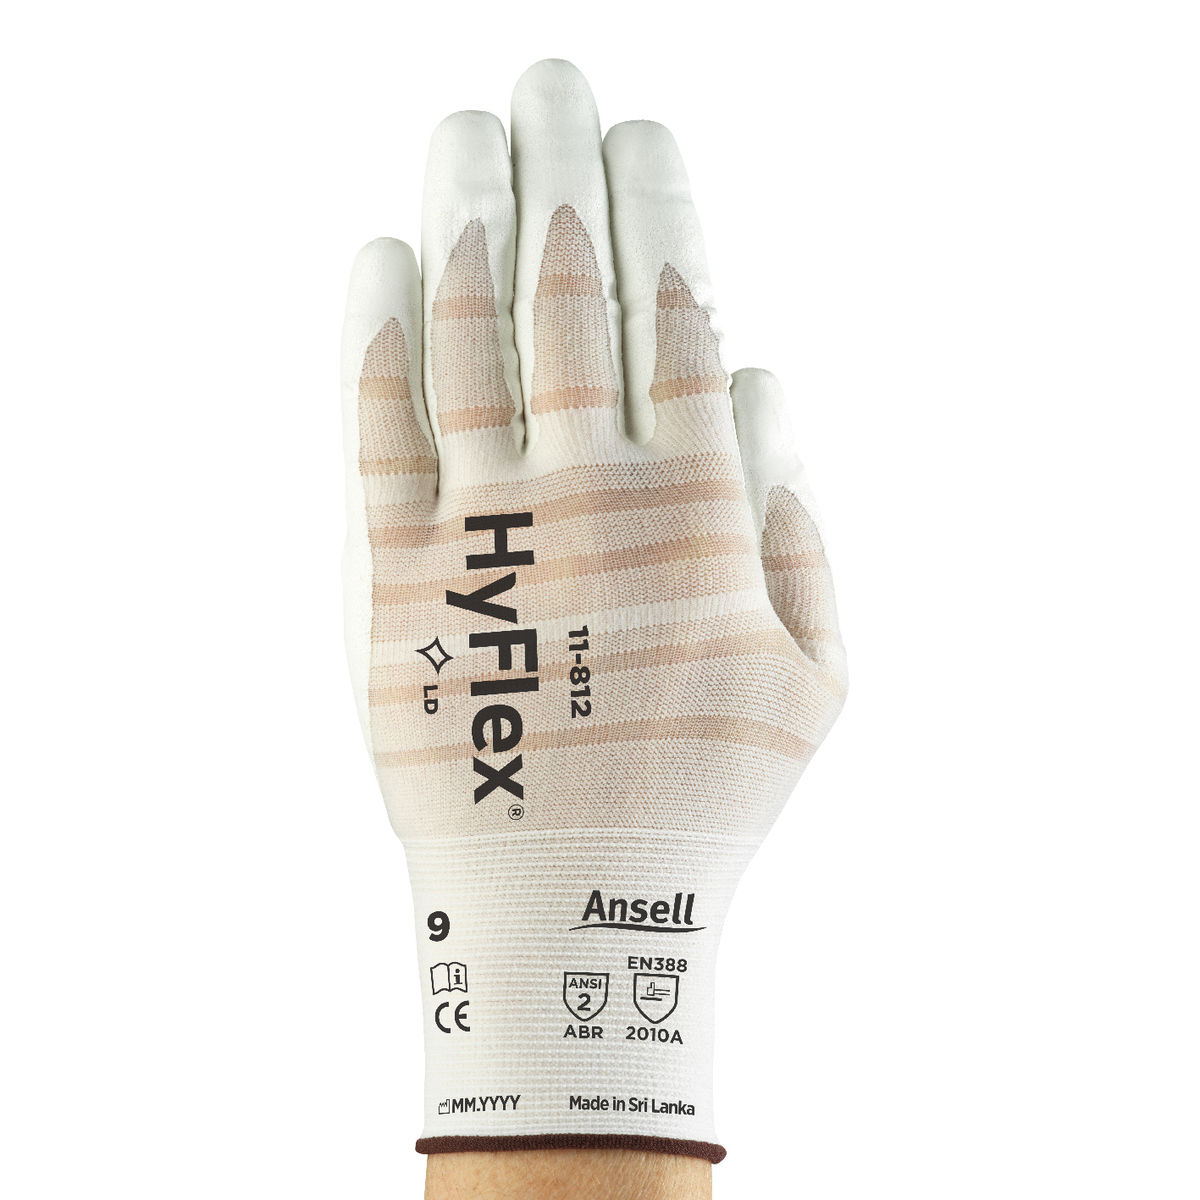 Ansell Size 10 HyFlex® Foam Nitrile Work Gloves With Ultrathin Nylon And Spandex Liner And Knit Wrist